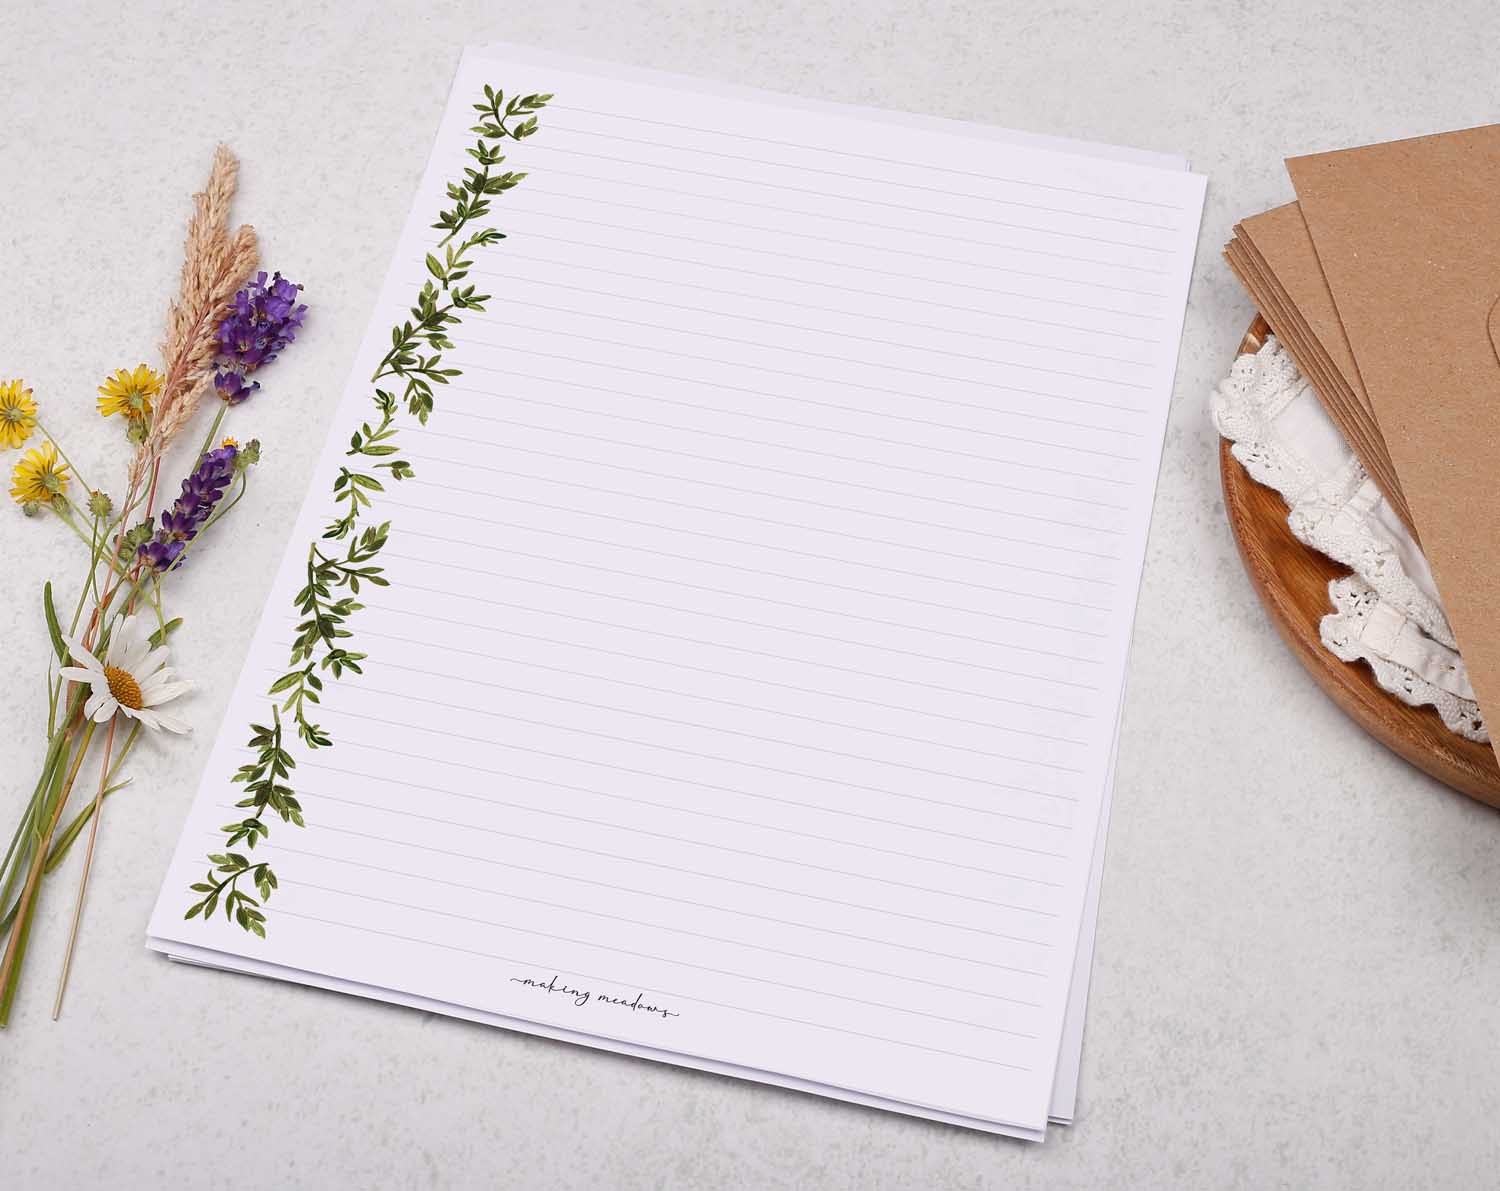 A4 letter writing paper sheets with a blue floral post border around the letter paper in a delicate leaf pattern.